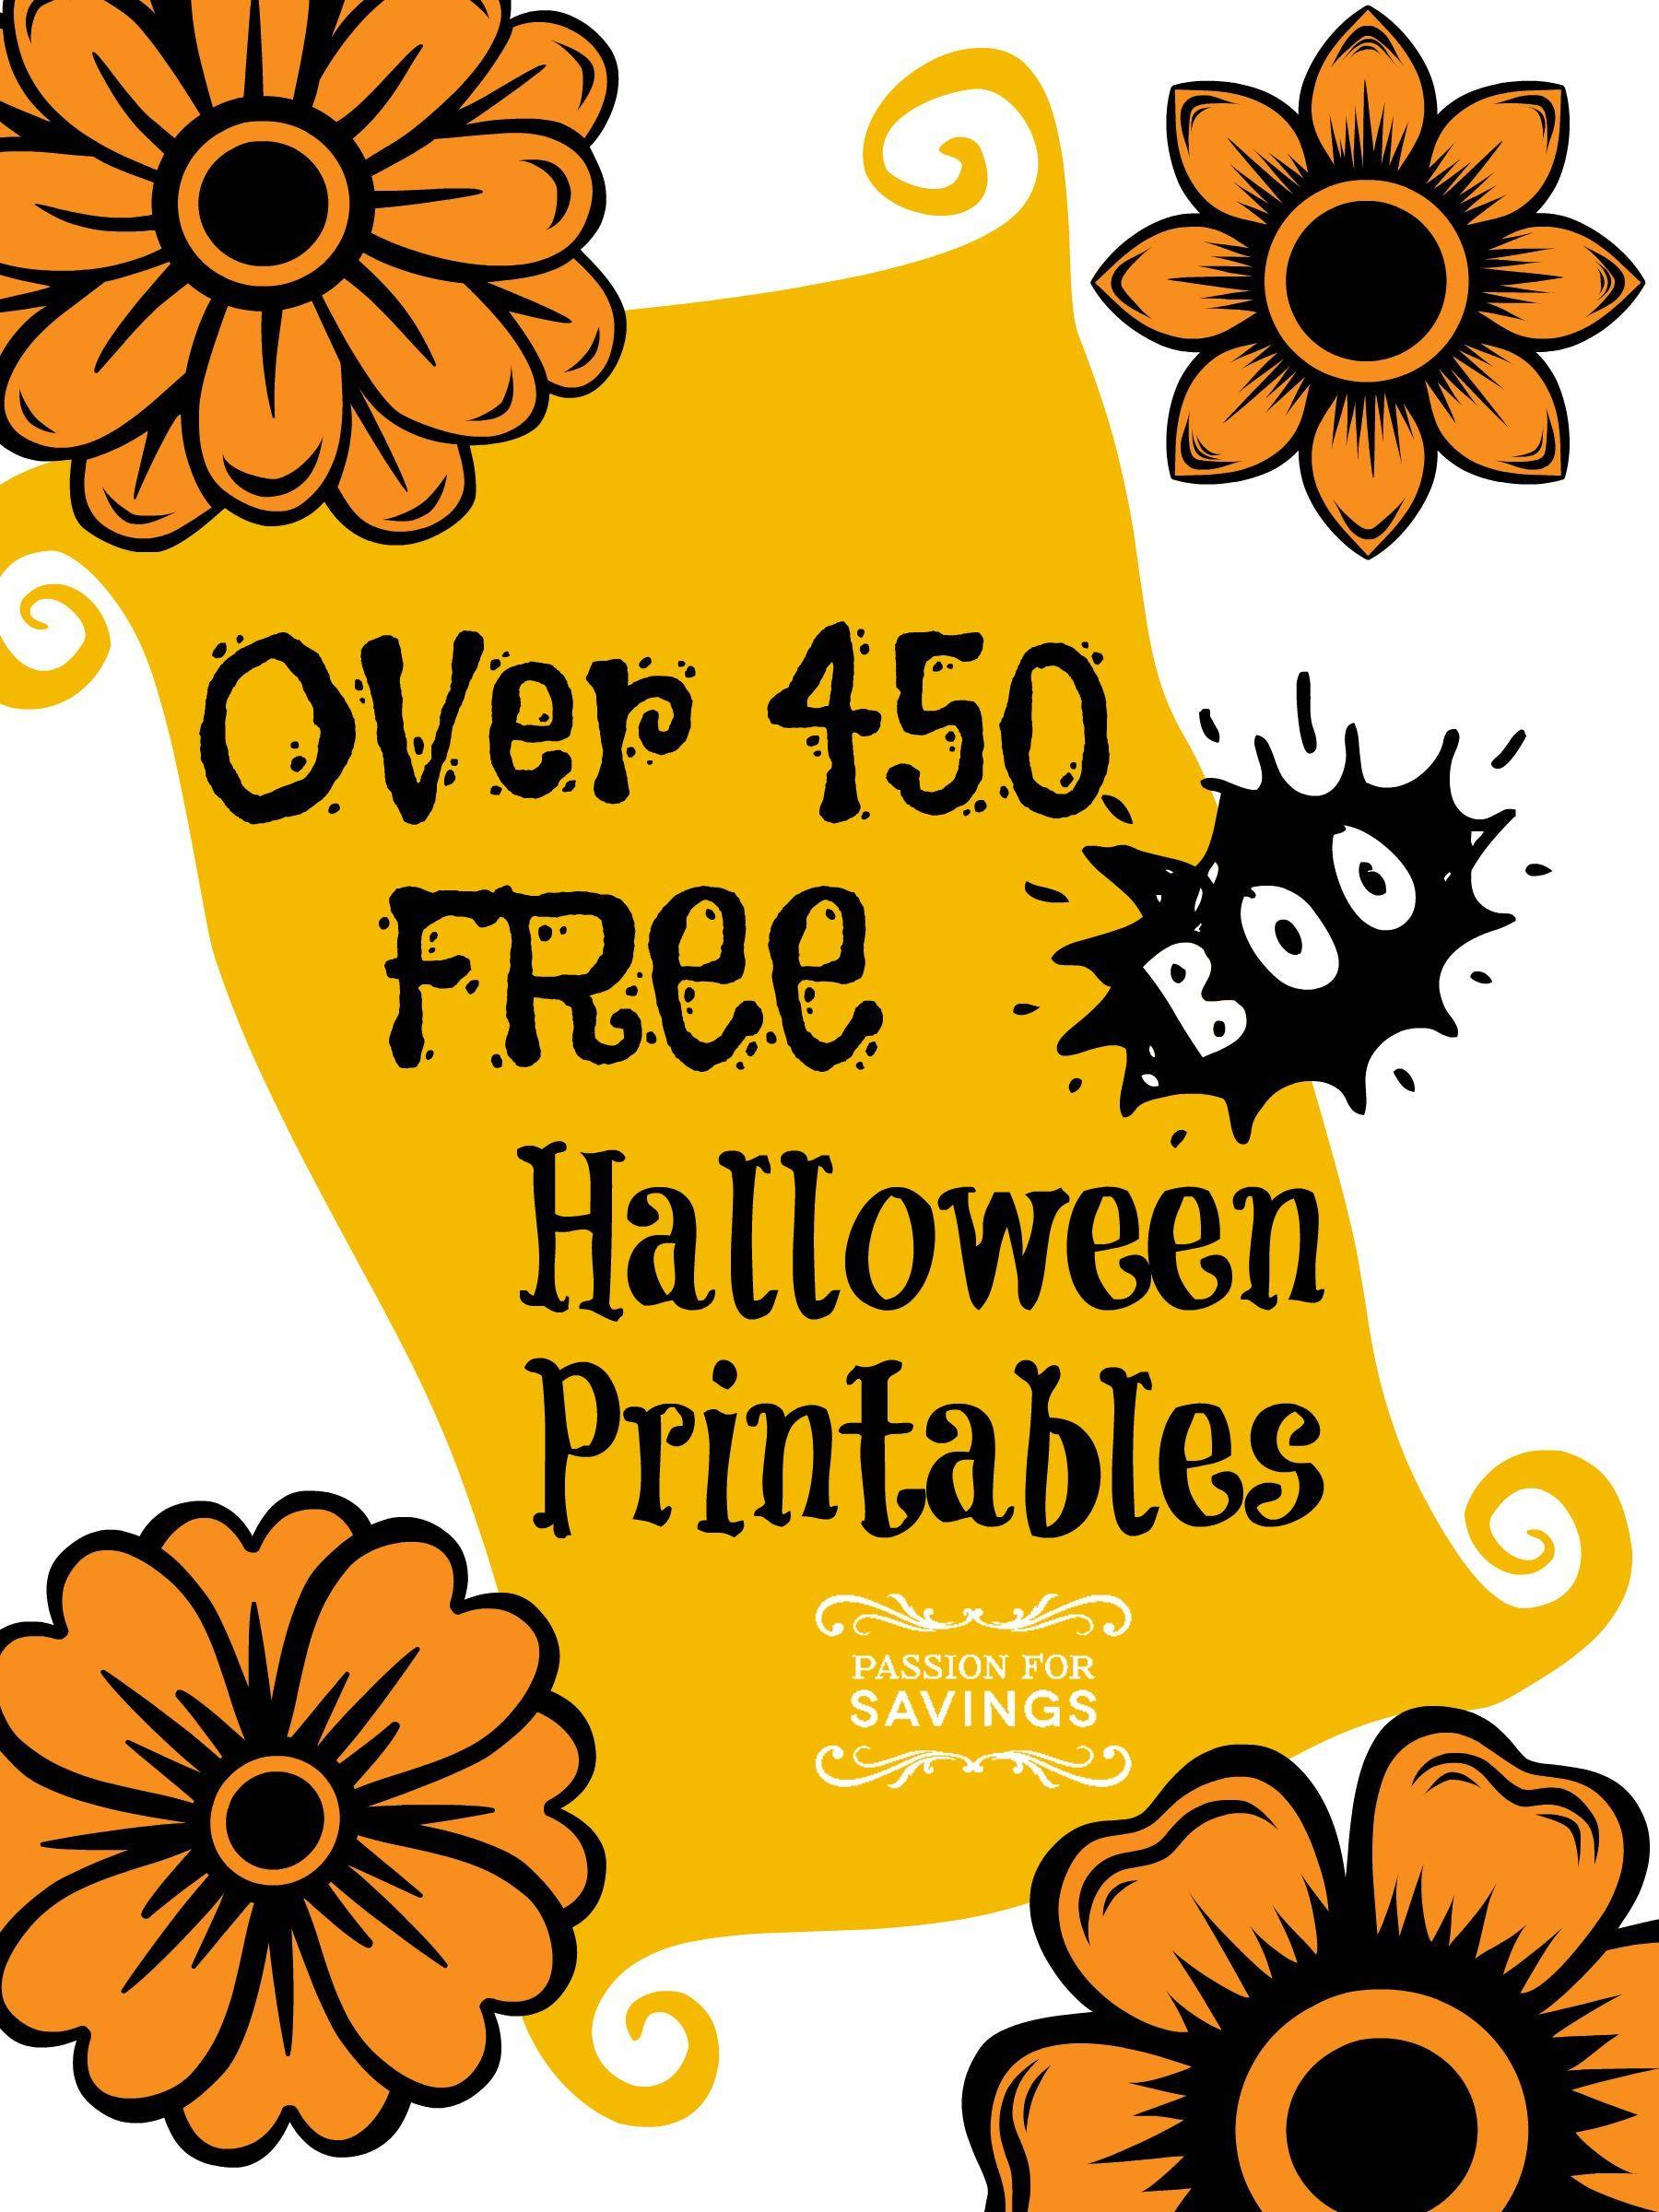 over-450-free-halloween-printables-to-download